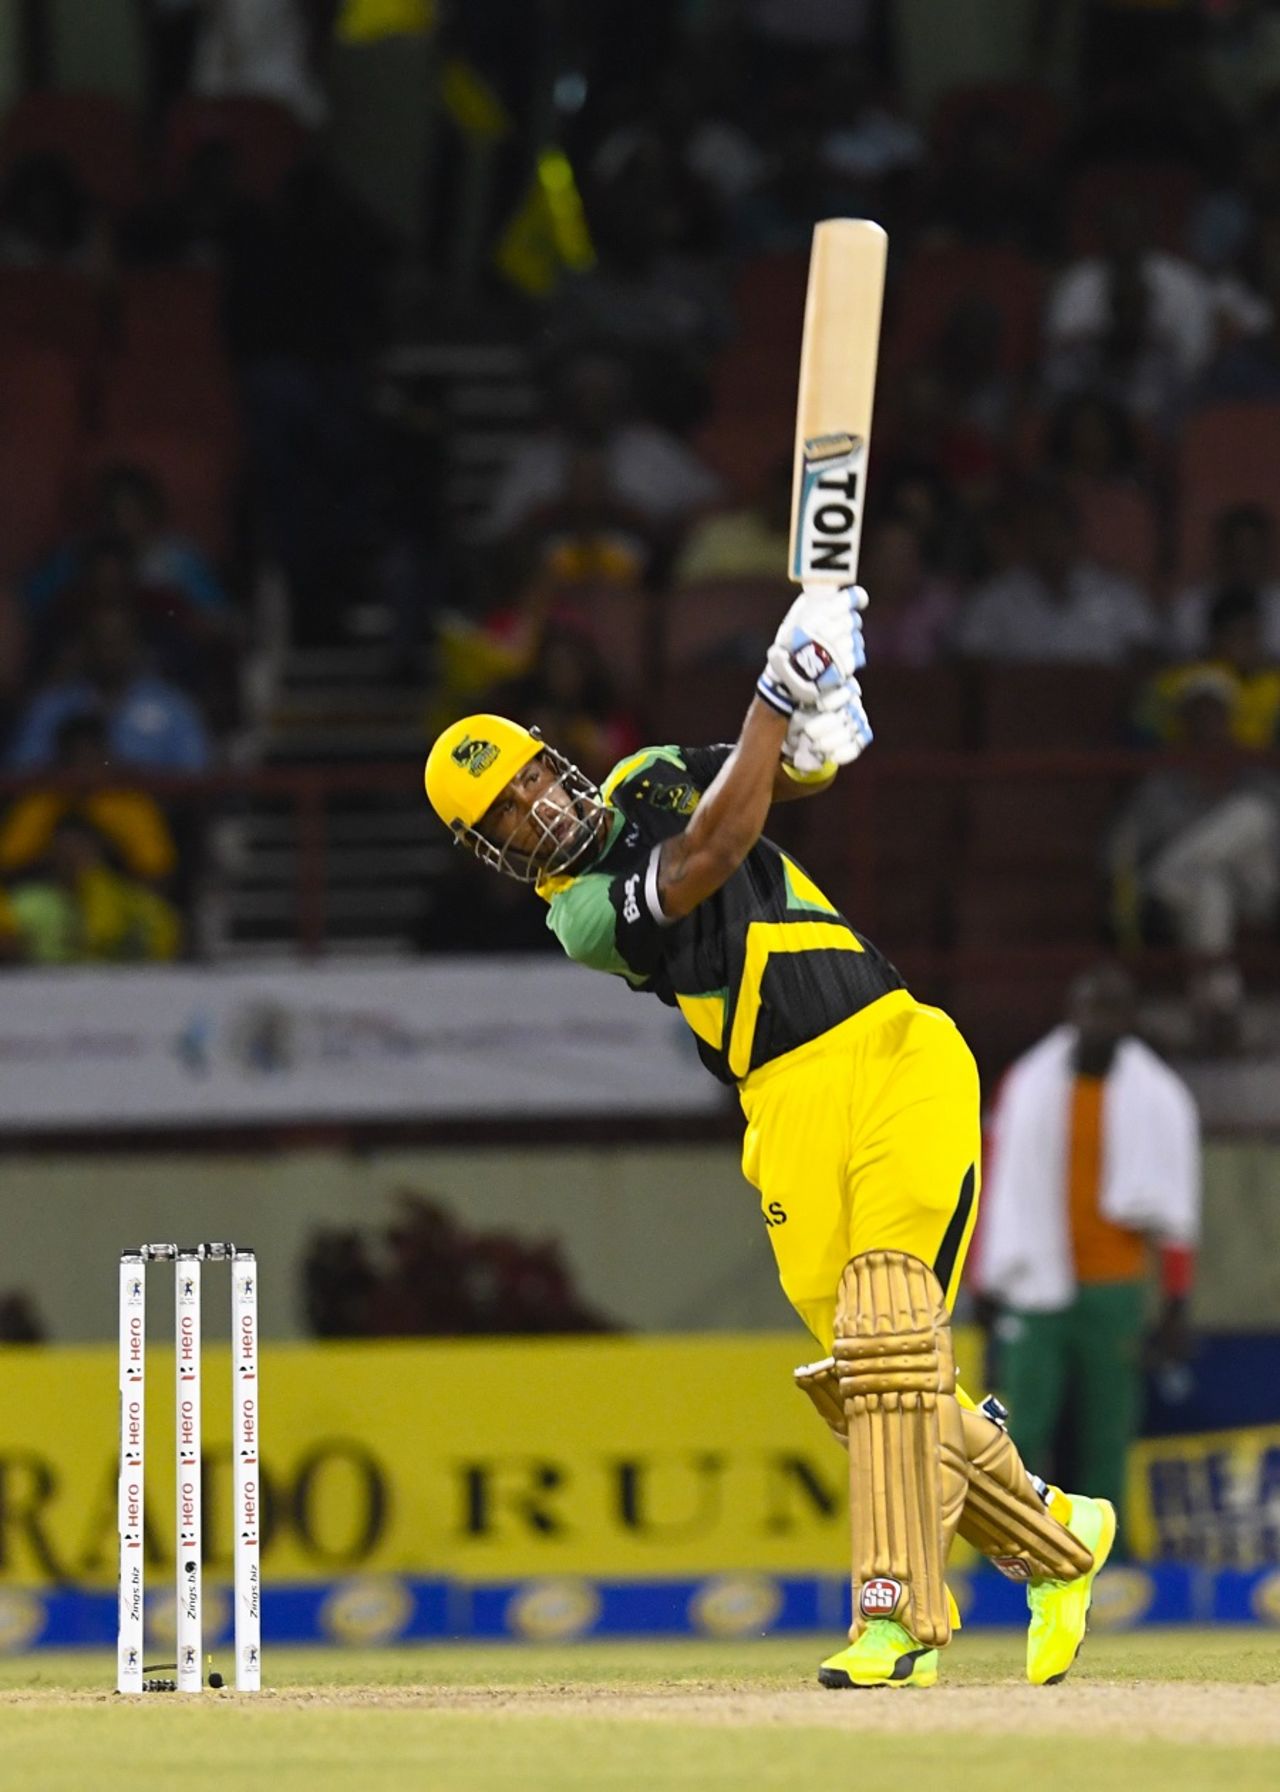 Lendl Simmons launches one down the ground, Jamaica Tallawahs v Amazon Guyana Warriors, CPL 2017, Providence, August 17, 2017